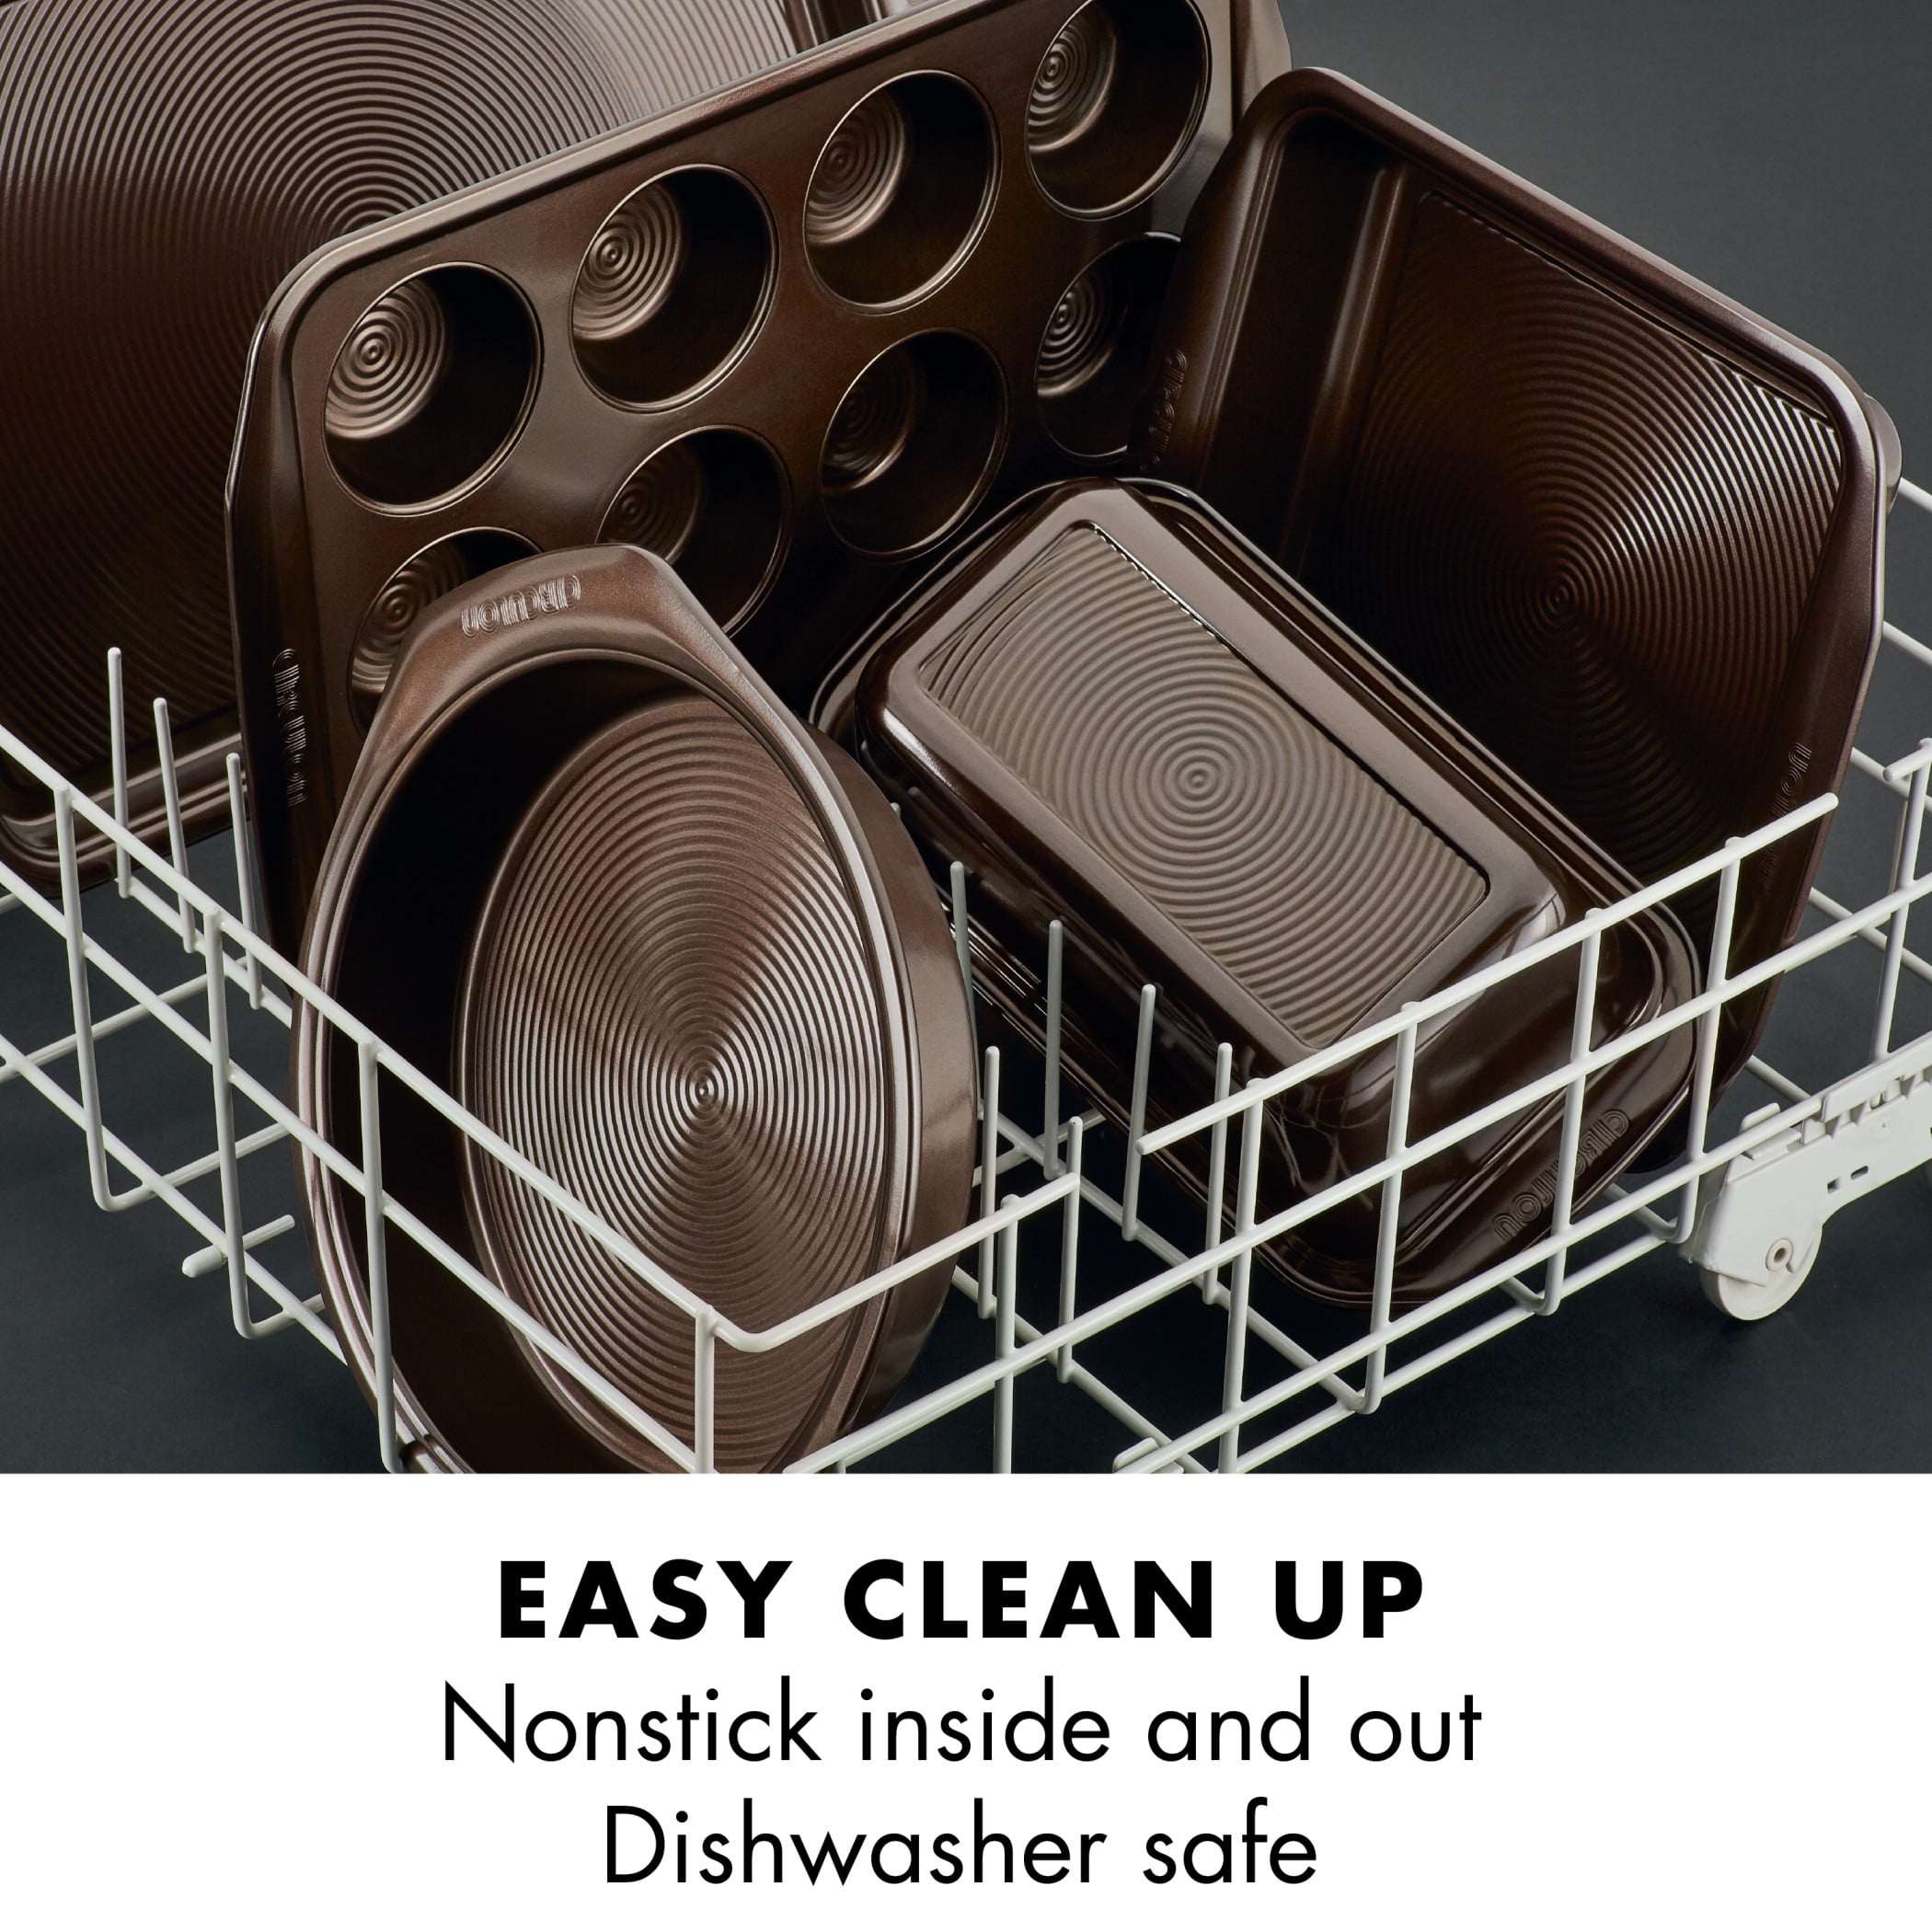 Up To 41% Off on Circulon Nonstick Bakeware Sets